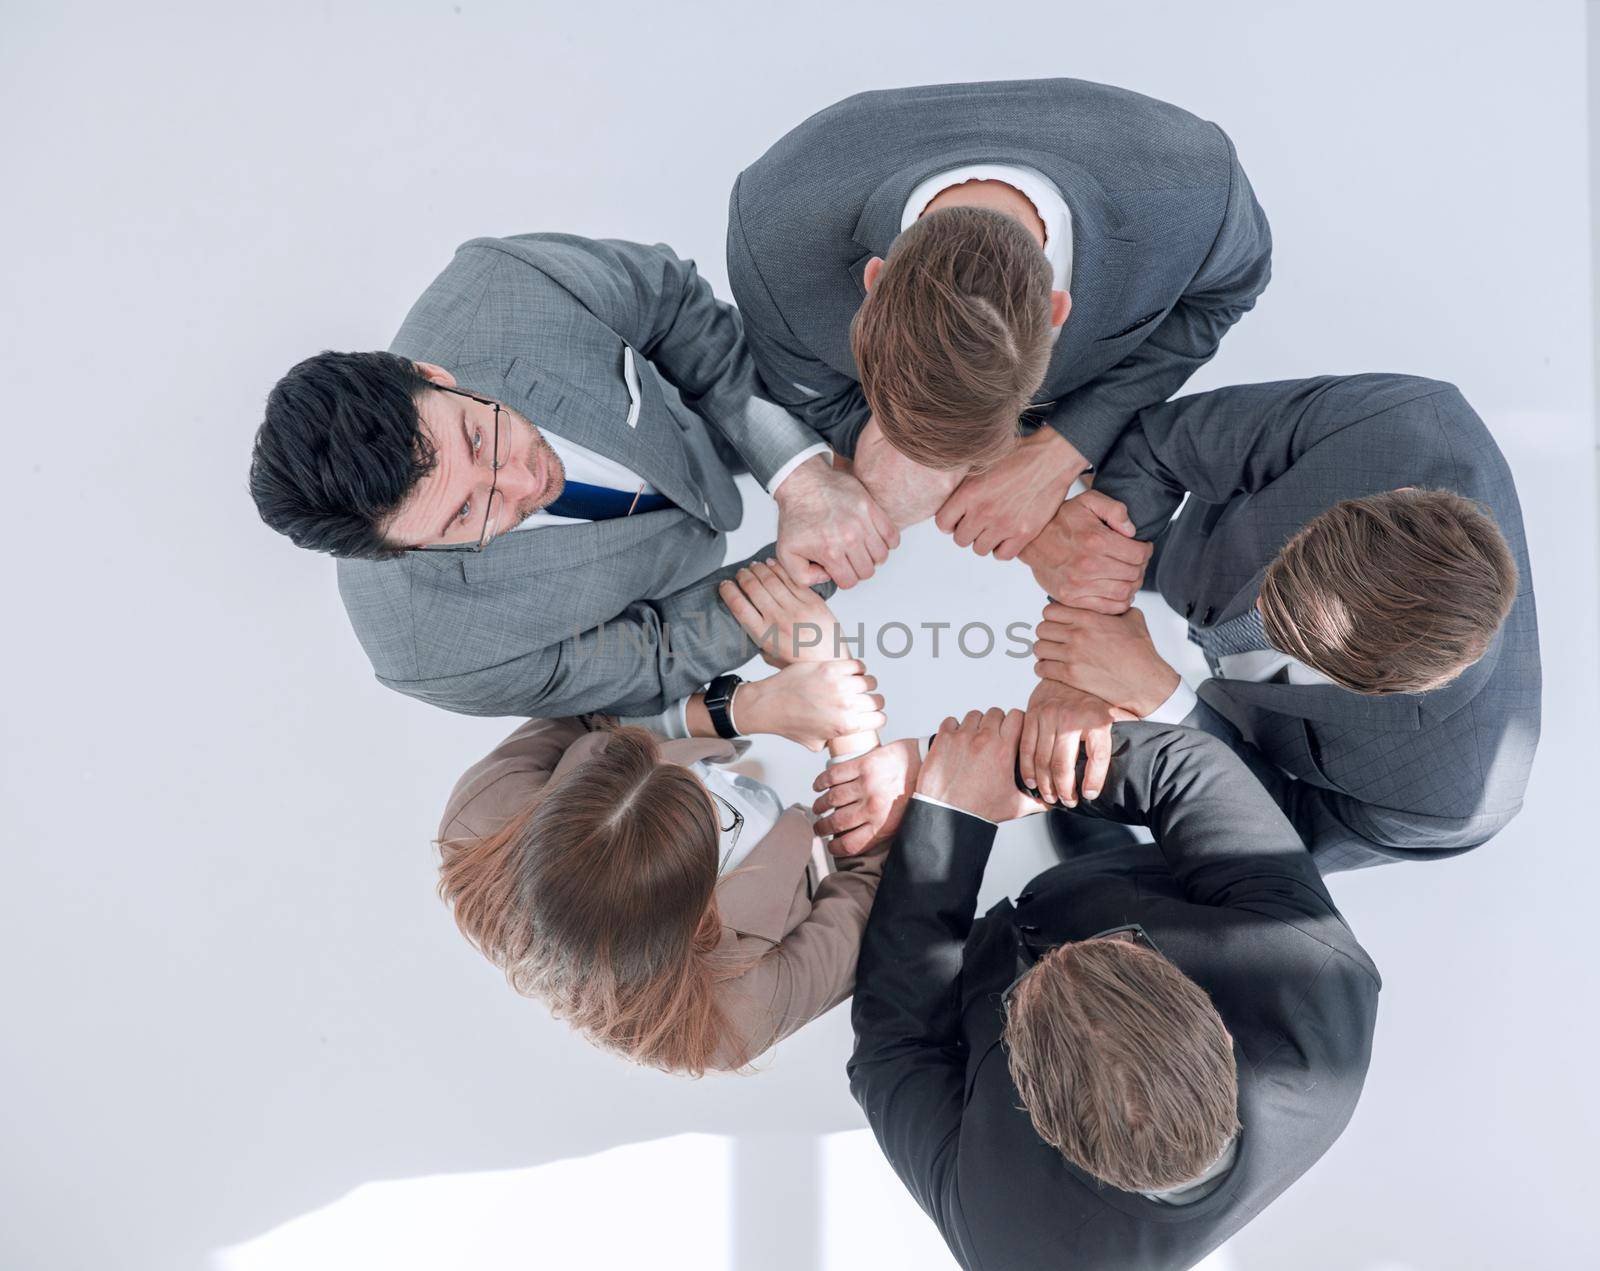 top view .business team standing in a circle .the concept of teamwork